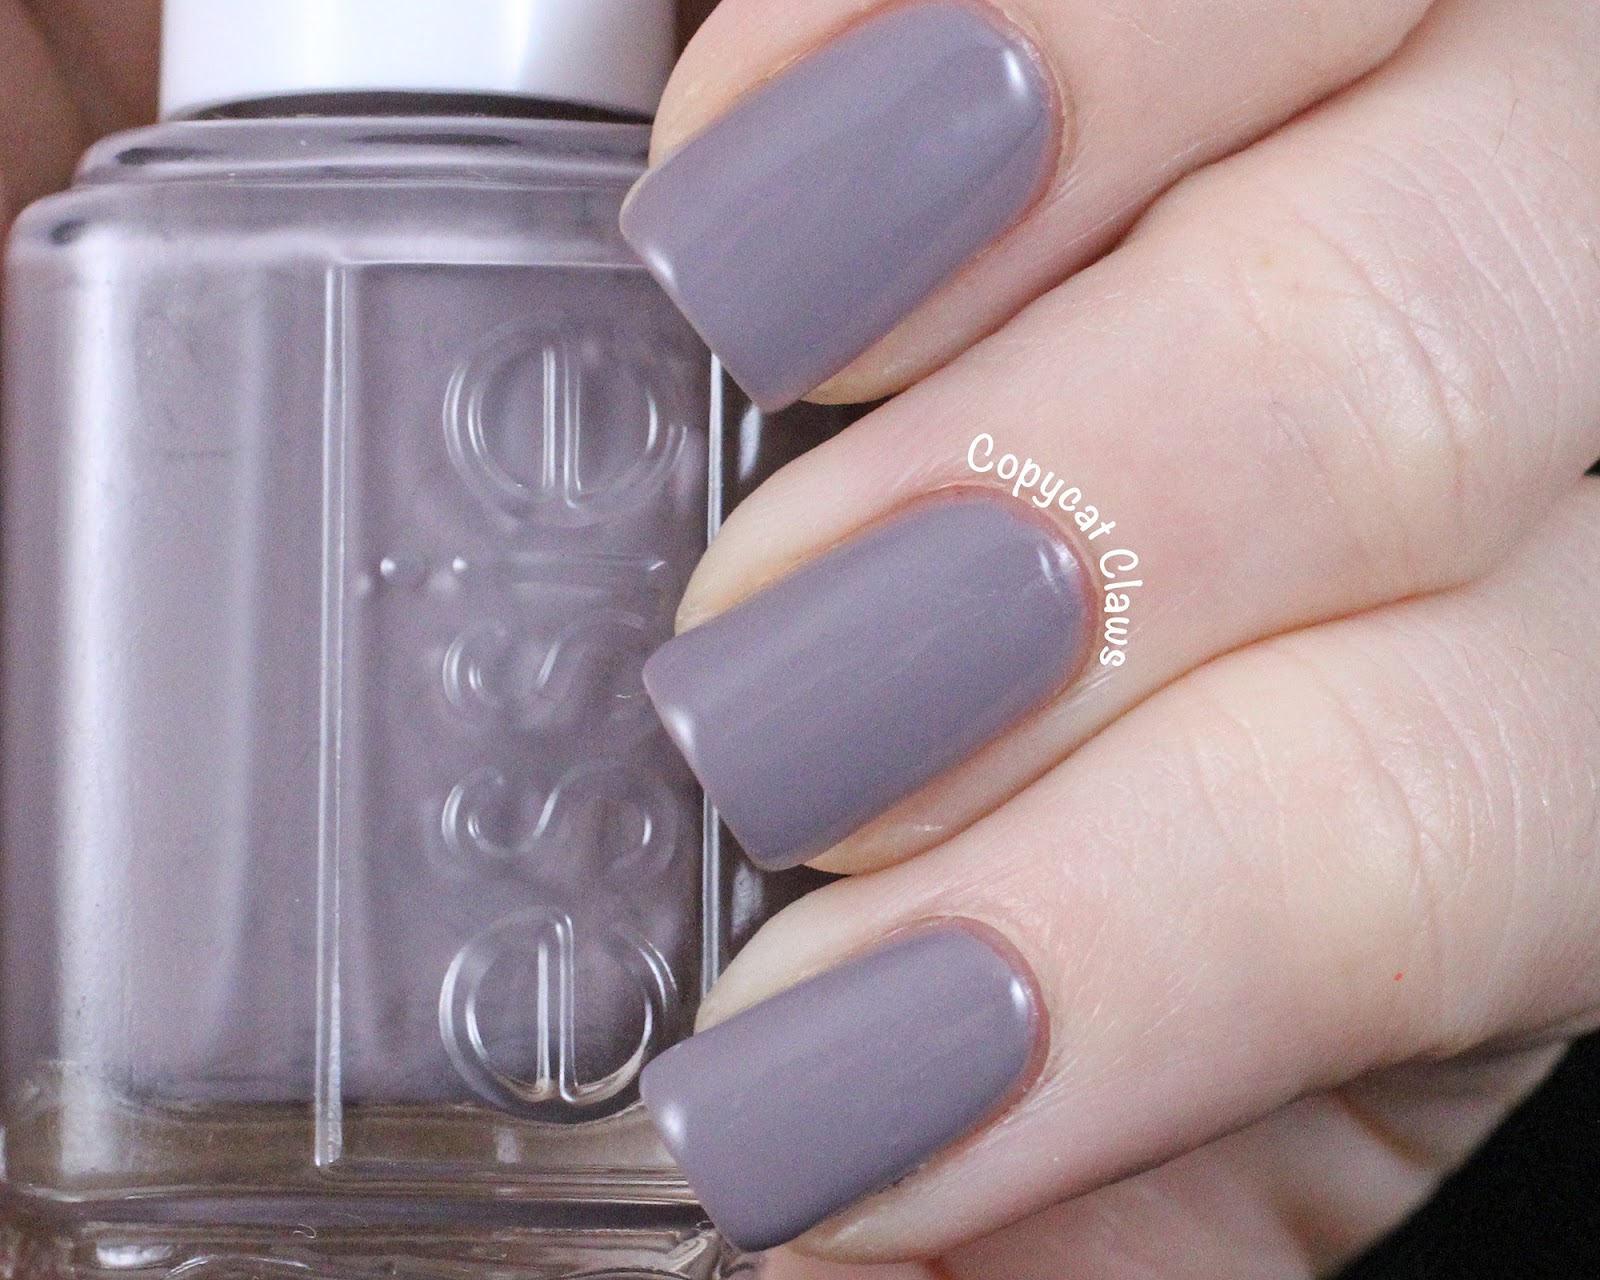 Essie Nail Polish in "Chinchilly" - wide 9